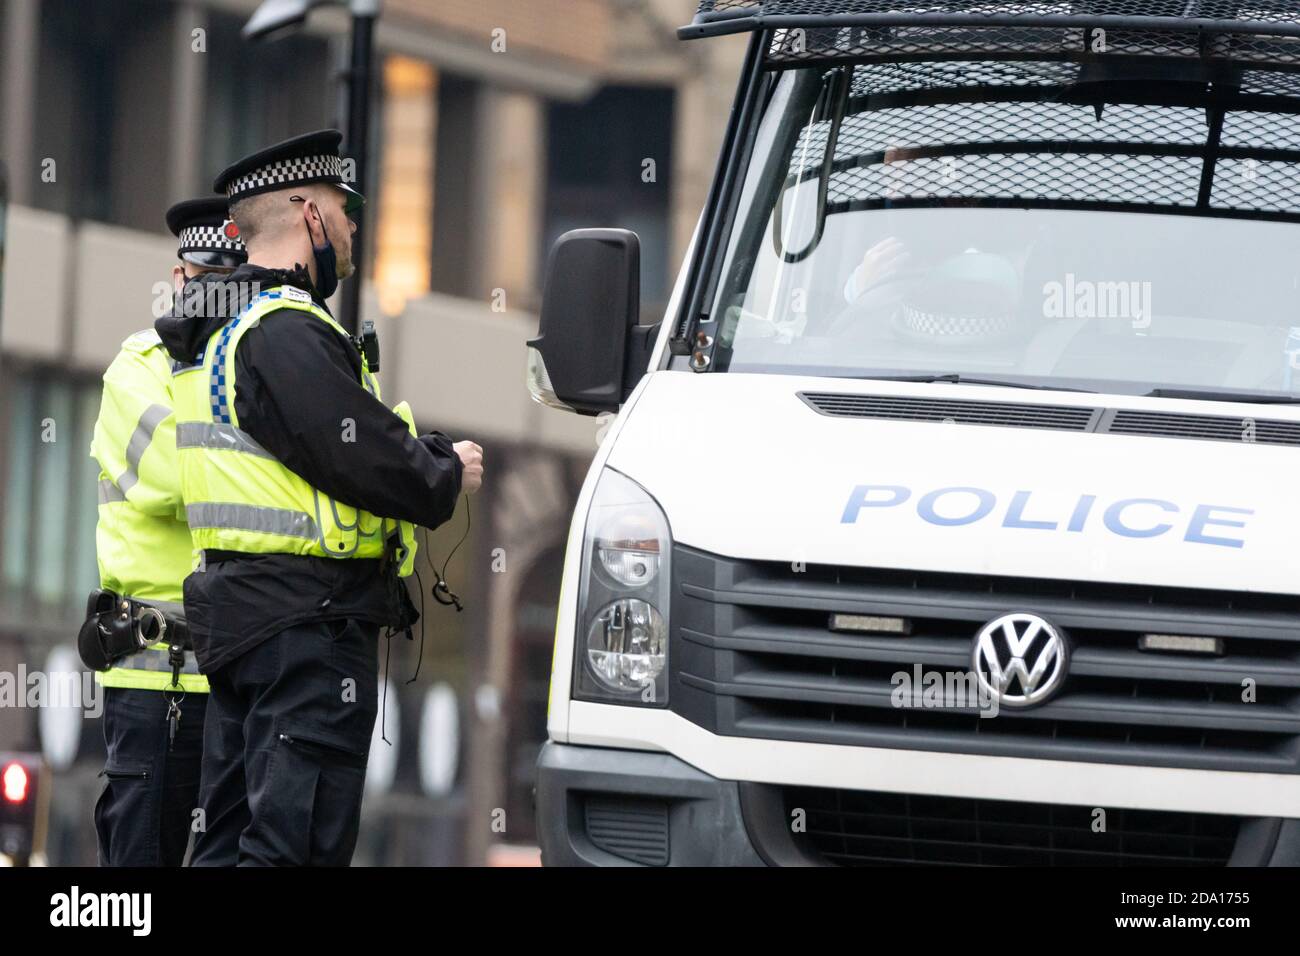 Police talking to a colleague in the drivers seat of the VW riot van in Manchester city centre 08-11-2020 during the anti lockdown protests Stock Photo